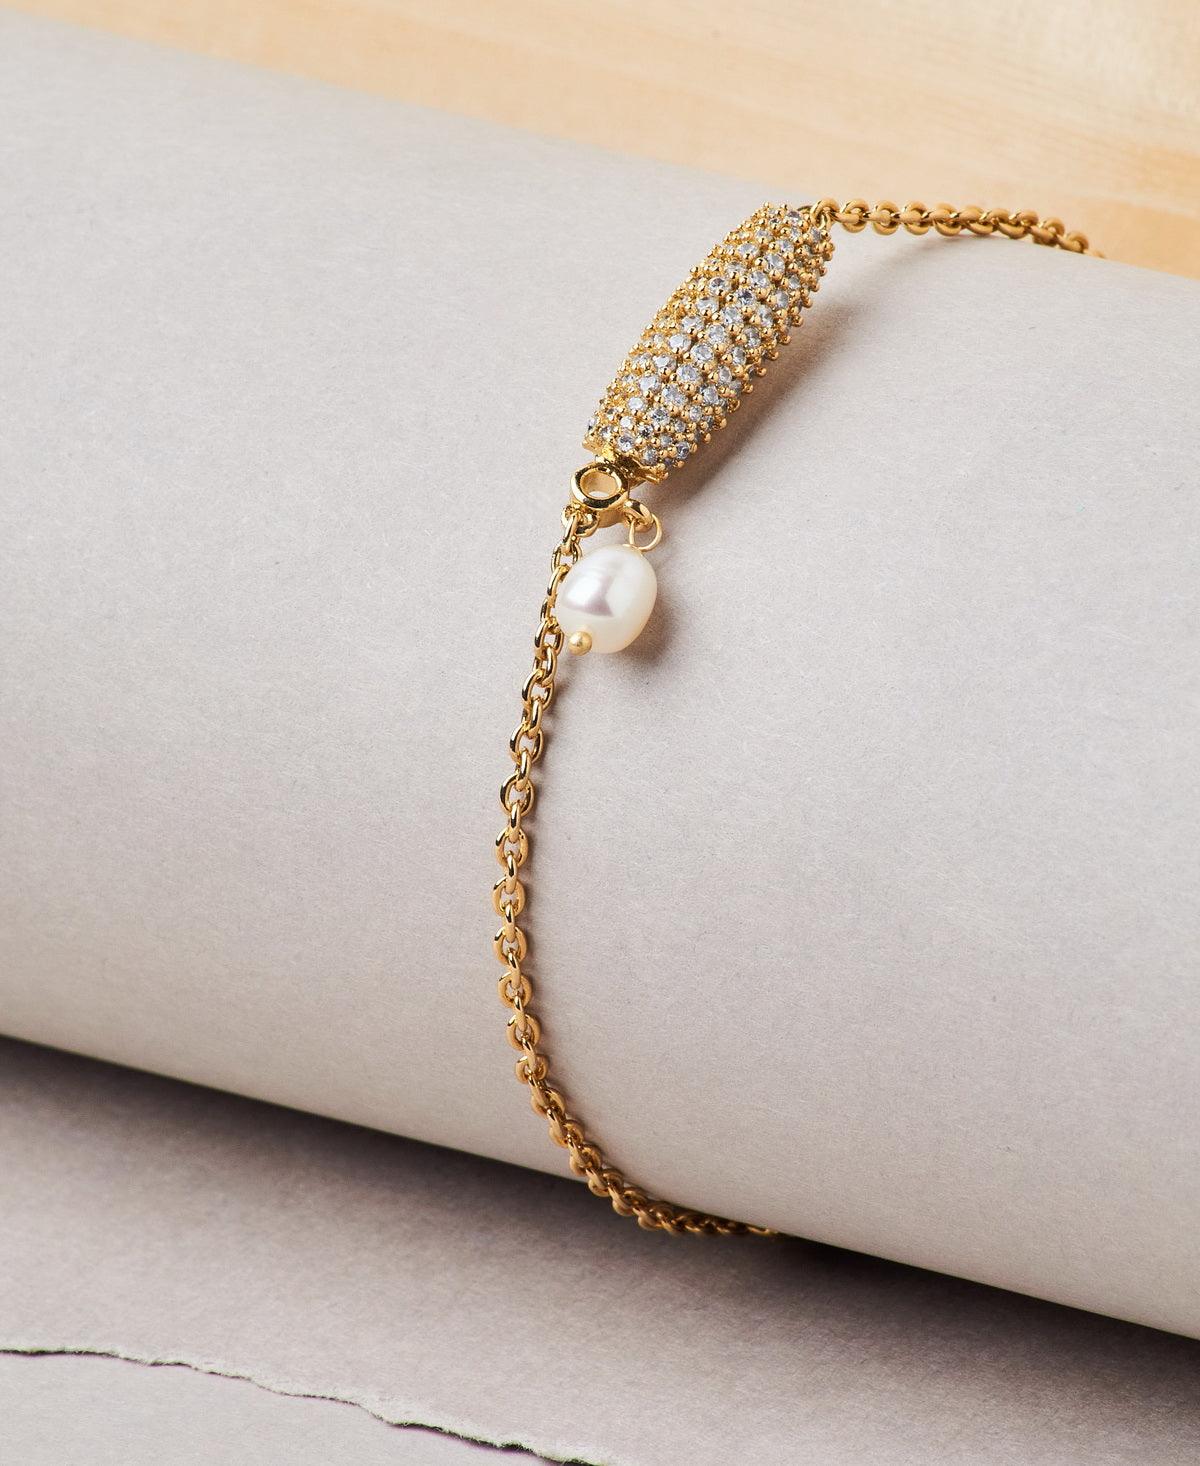 Hand Made Chain Bracelet with Toggle Closure | Fashion bracelets, Chain  bracelet, Gold bracelet chain